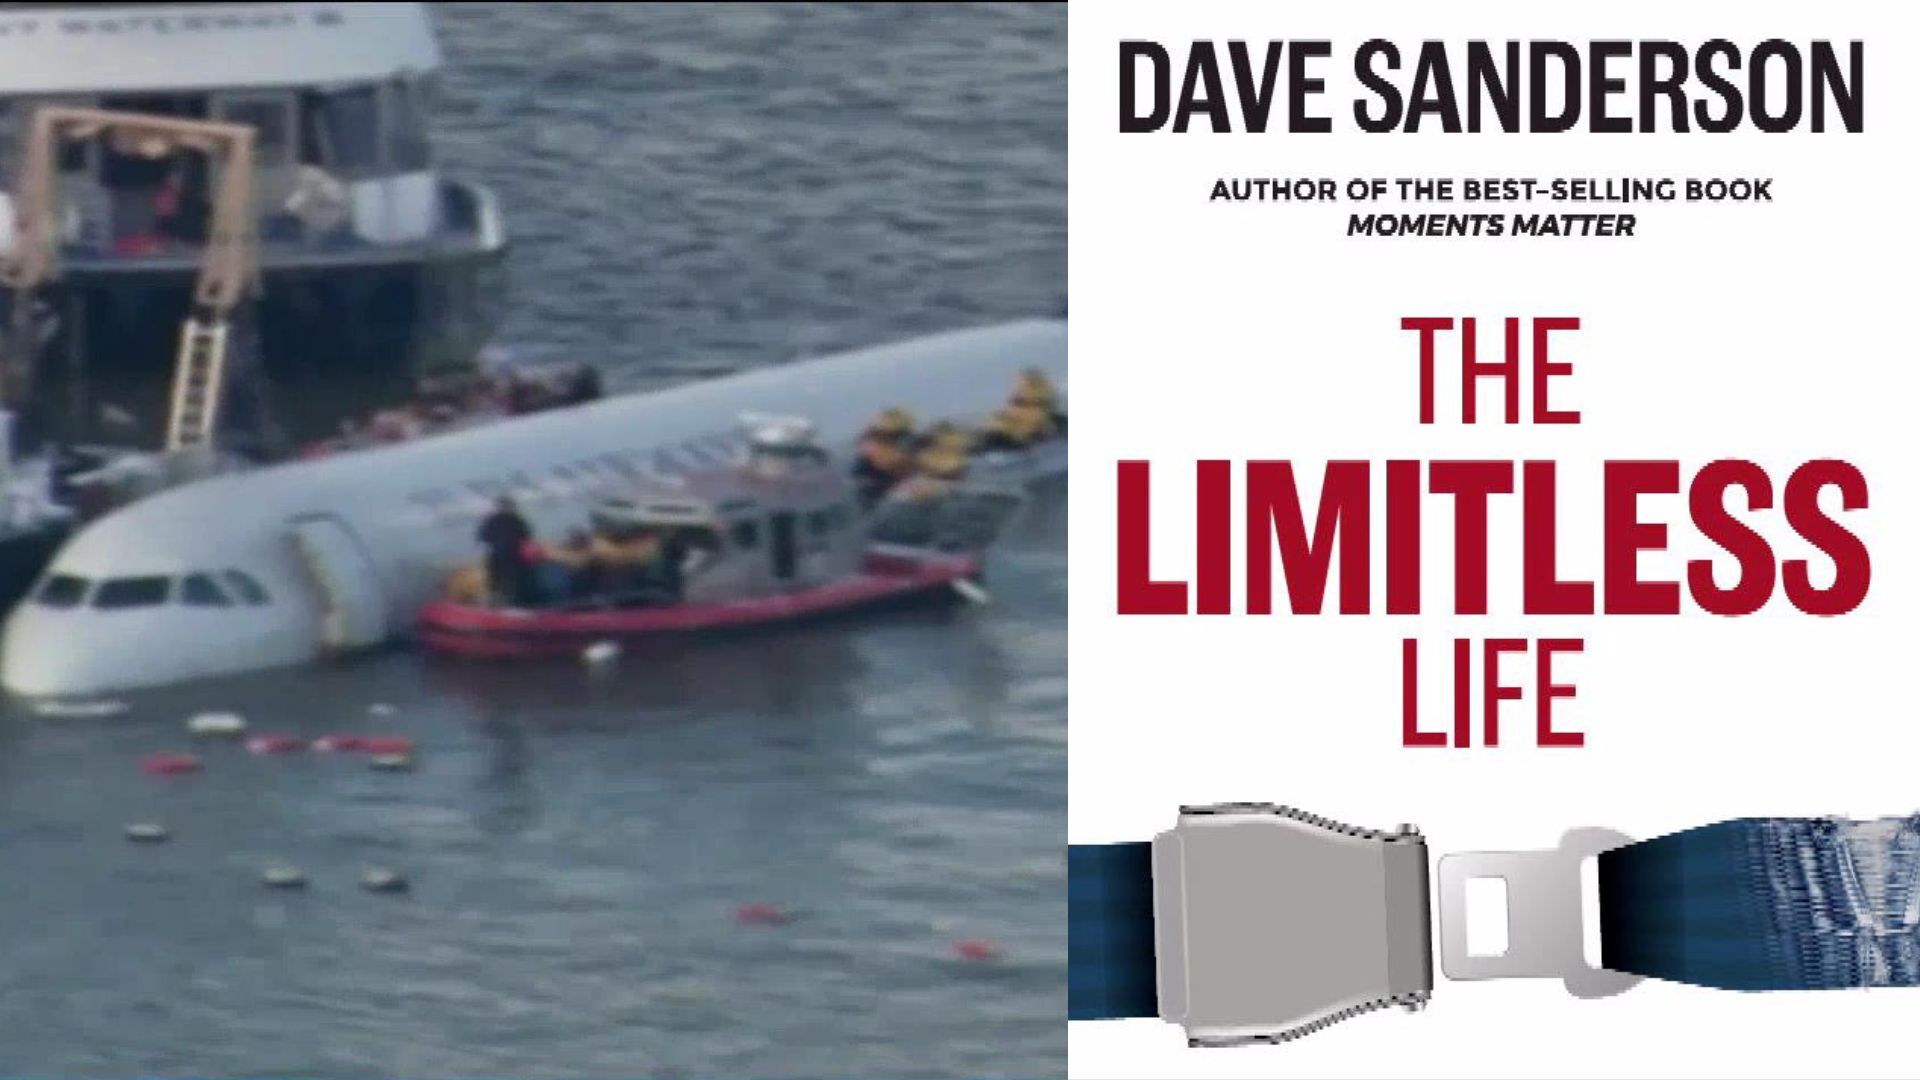 The Miracle on the Hudson flight survivor Dave Sanderson shares his inspiring story